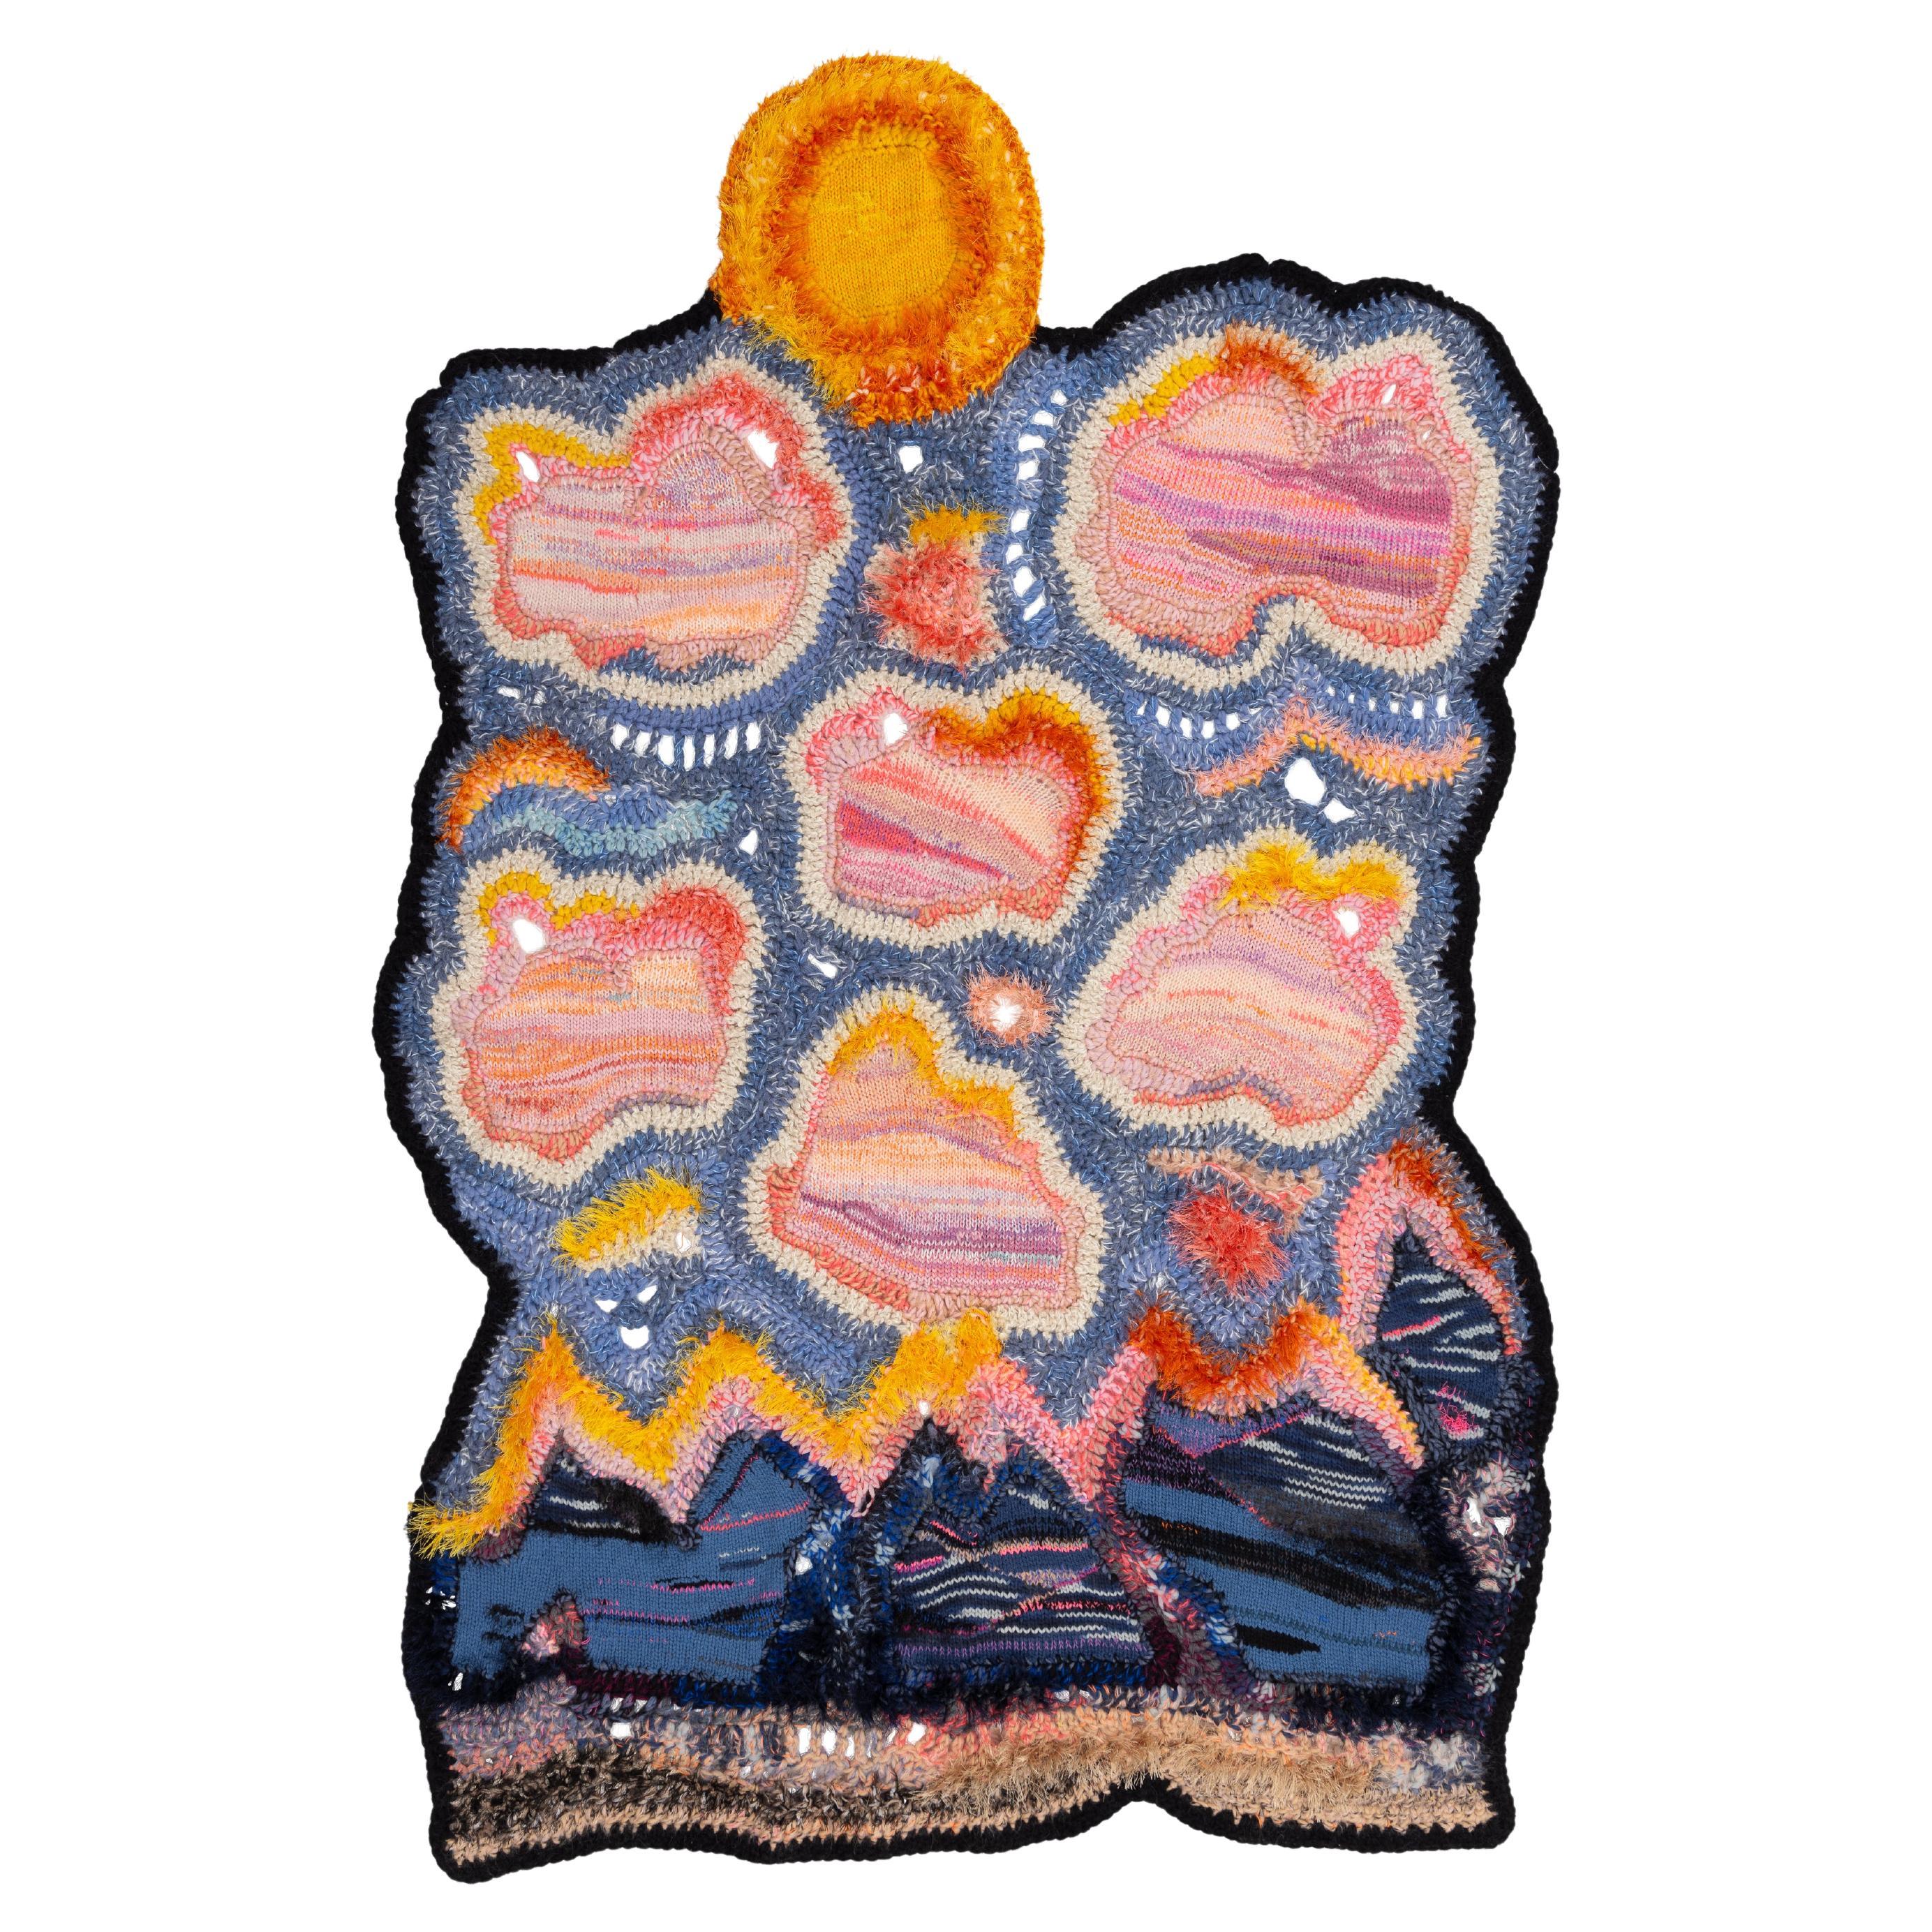 "Sunny Sky" Handcrafted Knit/Crochet Multicoloured Sky Landscape Wallhanging For Sale